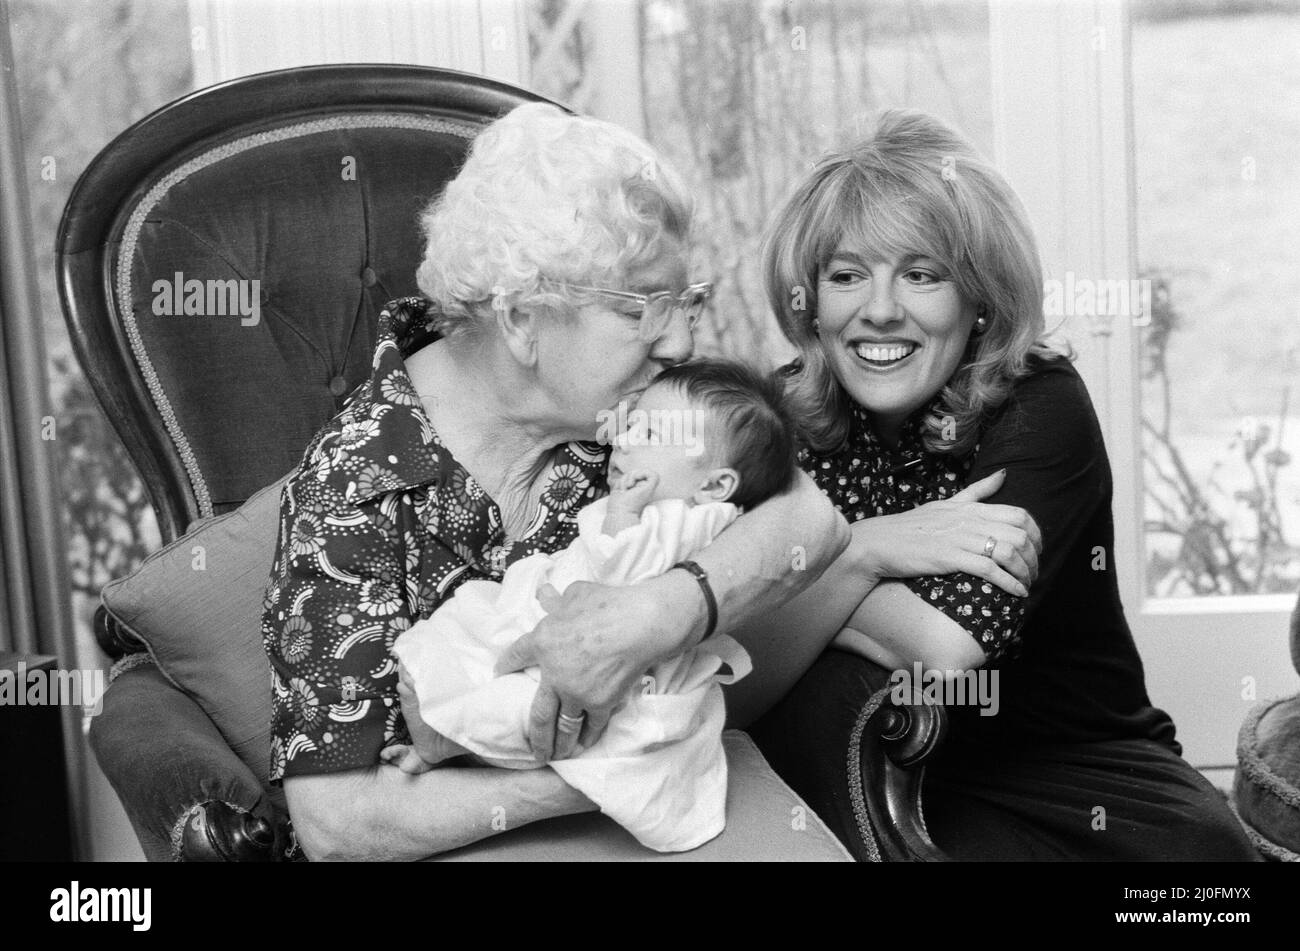 'That's Life' presenter Esther Rantzen presents her month old baby Emily to Annie Mizen today. Annie, 86, who became famous on That's Life by eating caviar and Chinese food, testing drinks and dancing in the street, was invited to elevenses at Esther's home and to meet Emily. 22nd February 1978. Stock Photo